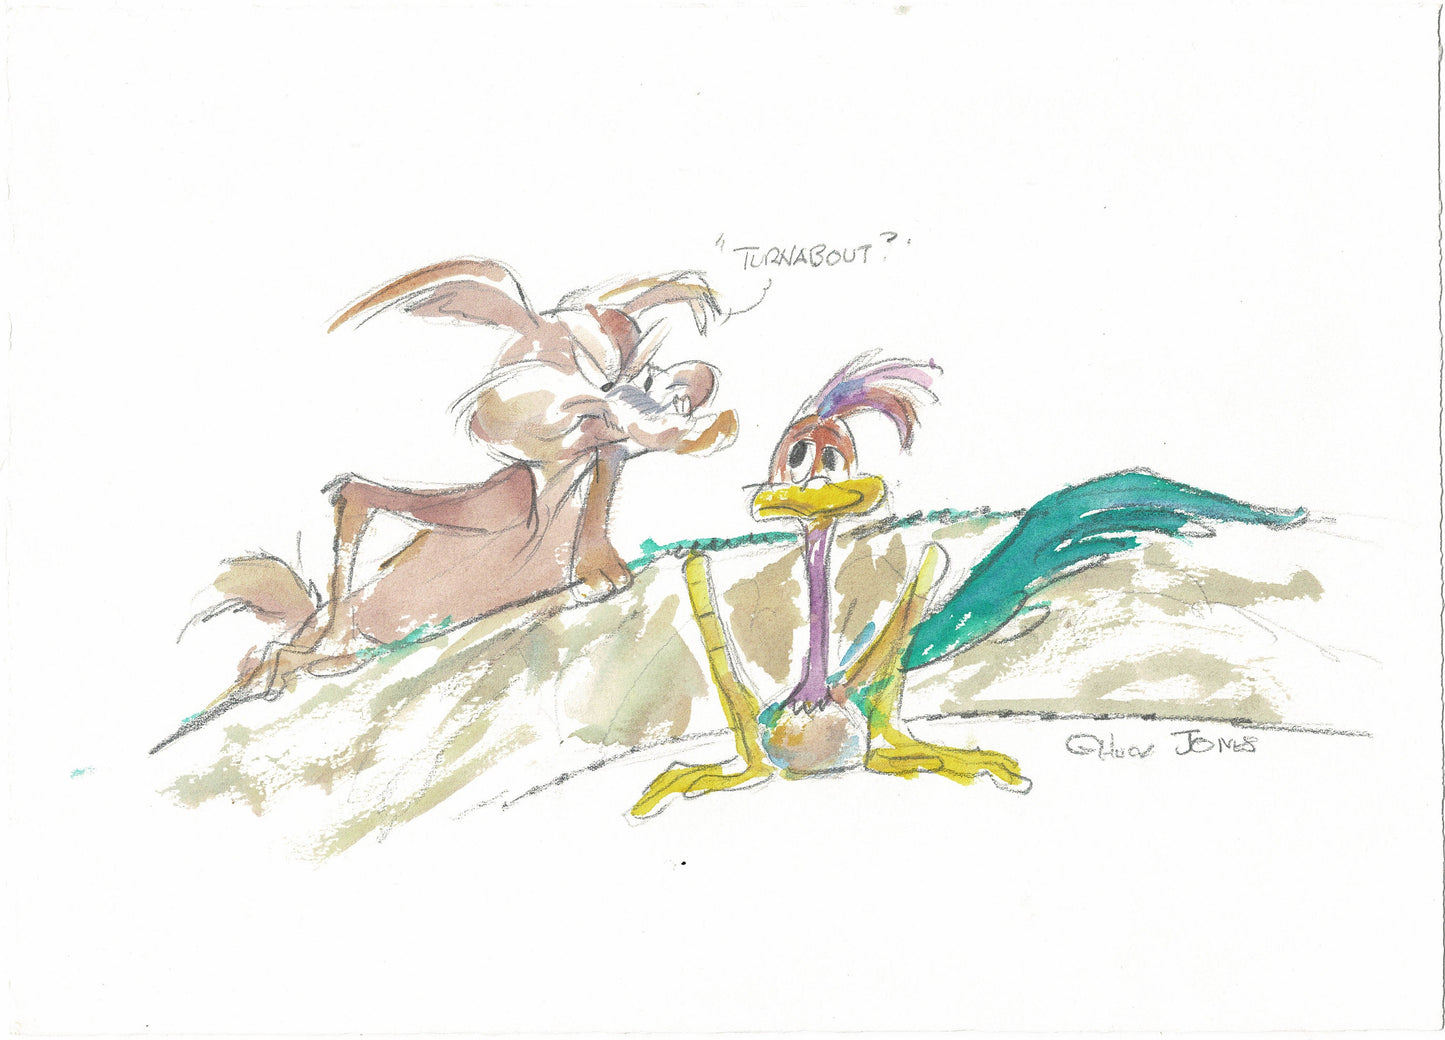 Chuck Jones Original Hand-painted and Signed Watercolor Painting "Turnabout" featuring Wile E Coyote and The Roadrunner from 2000